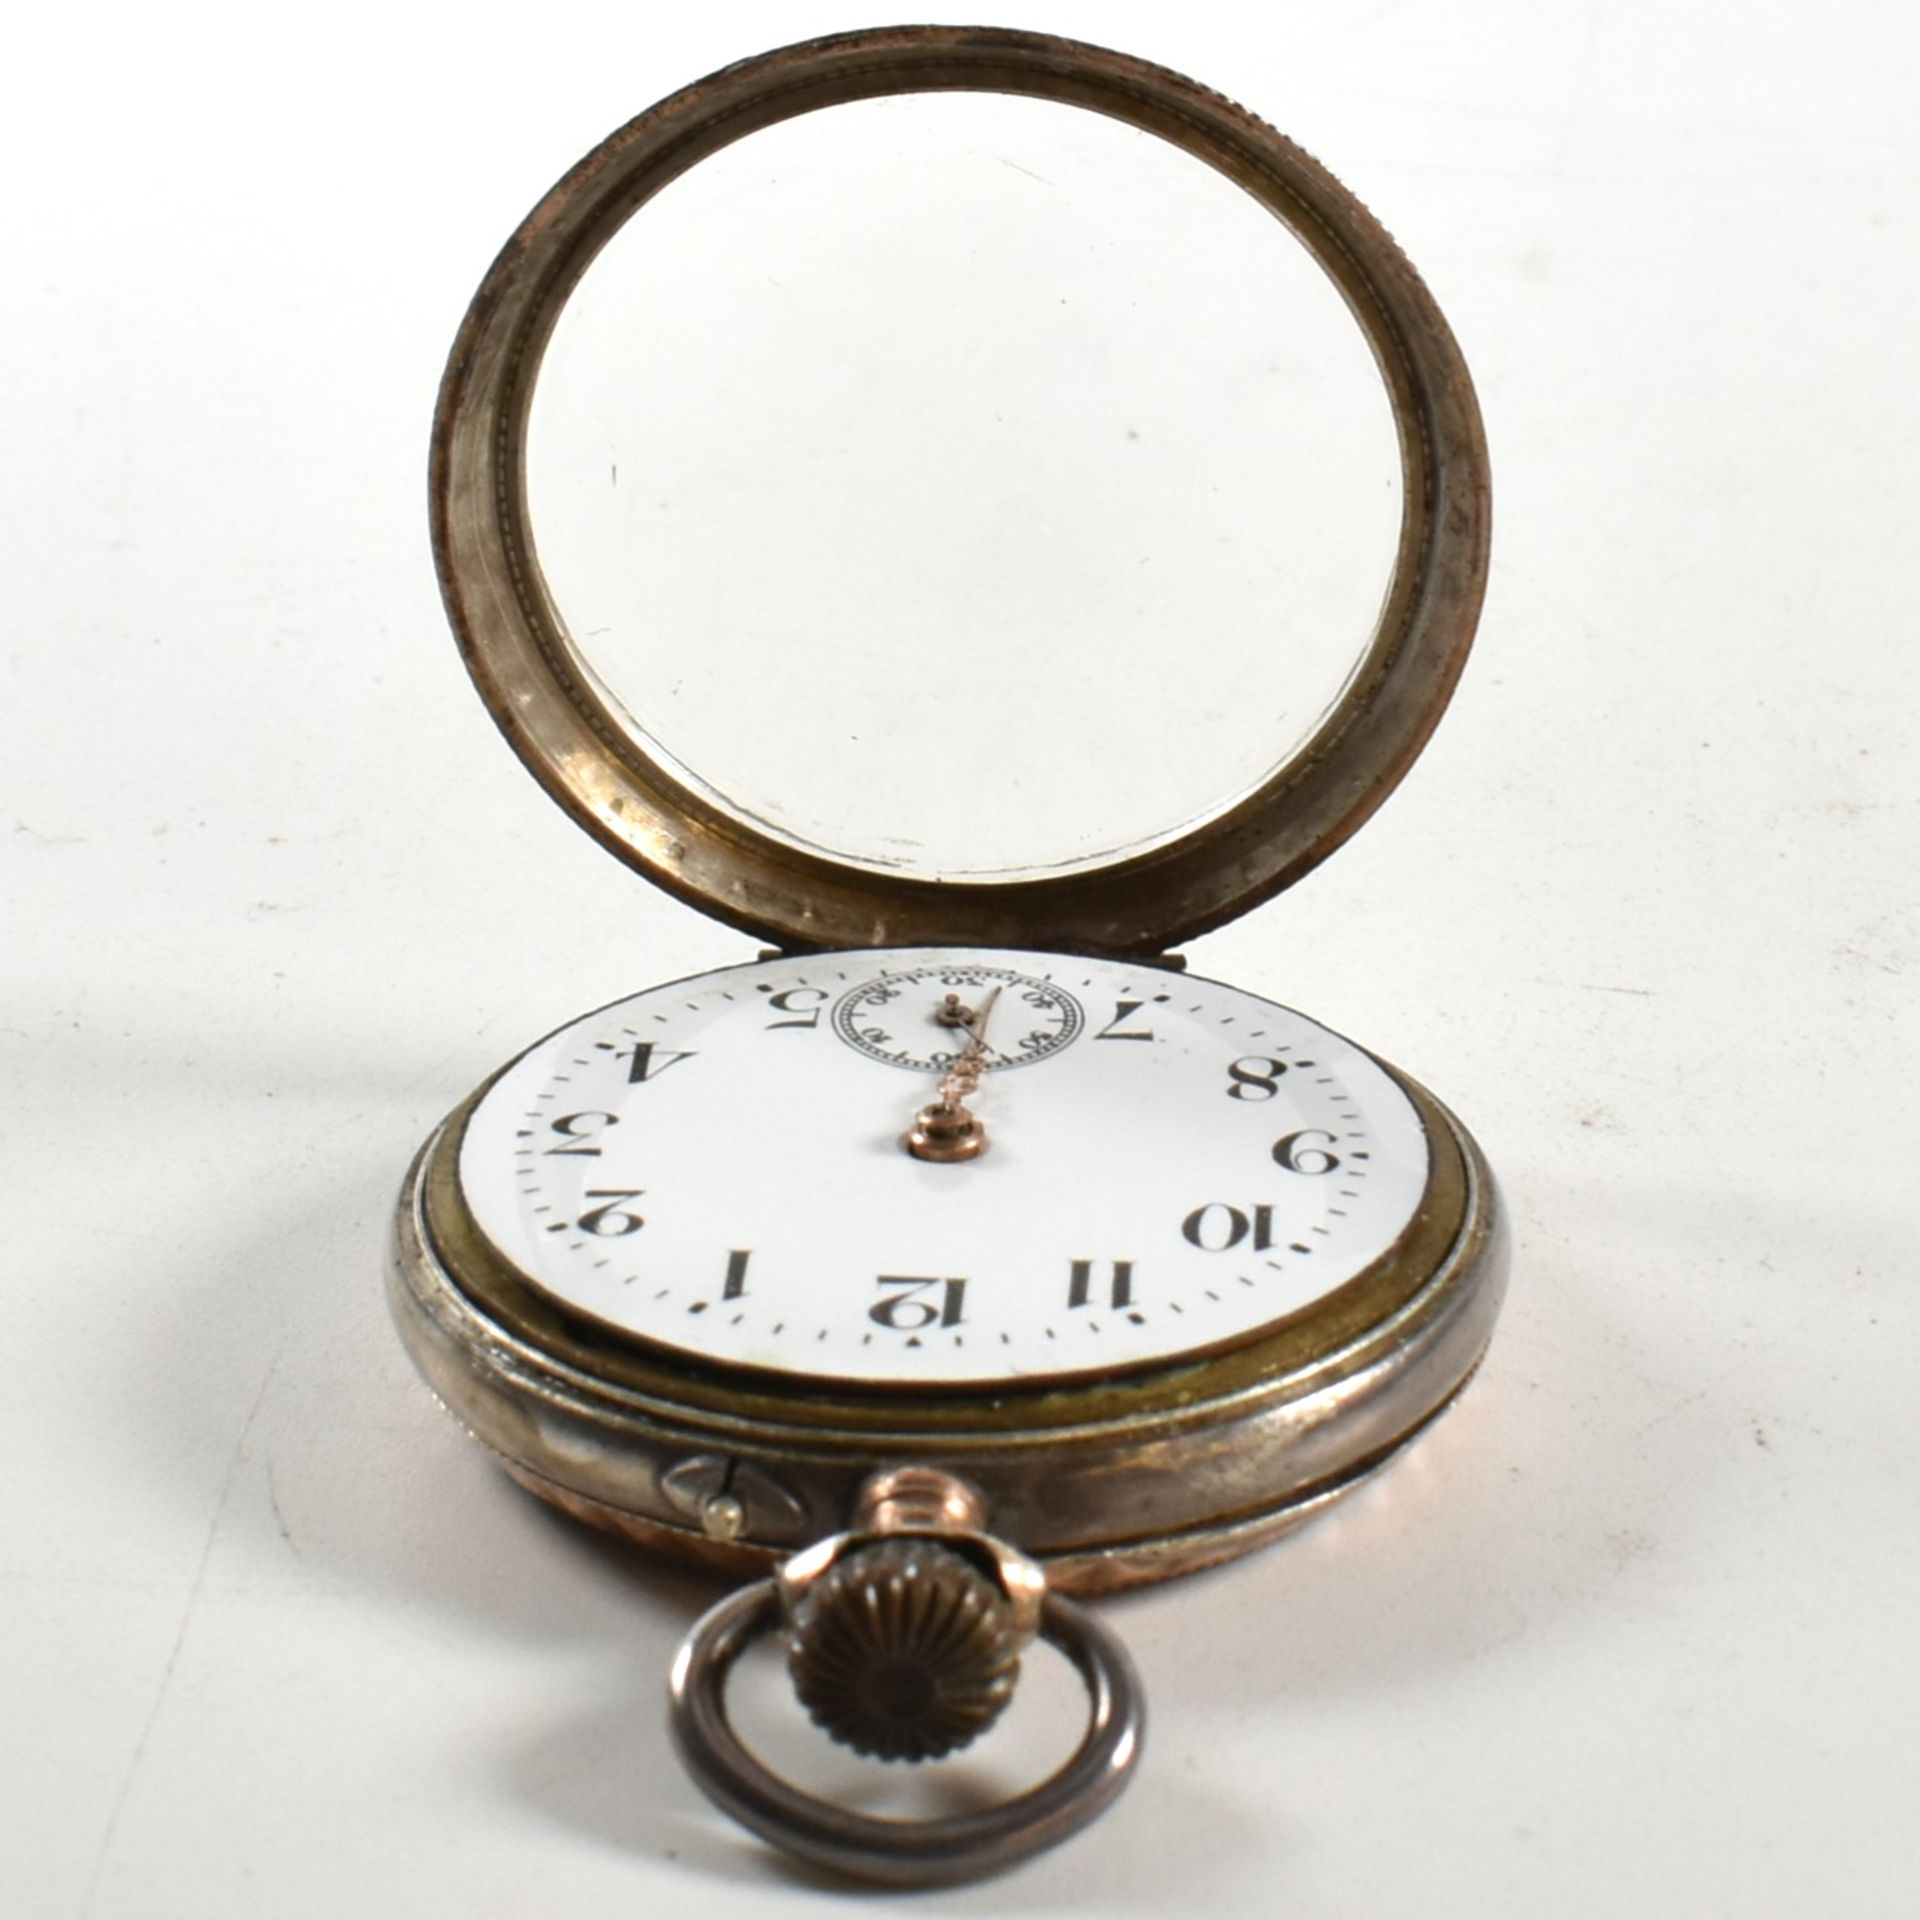 SILVER 800 CONTINENTAL OPEN FACED CROWN WIND POCKET WATCH - Image 4 of 8